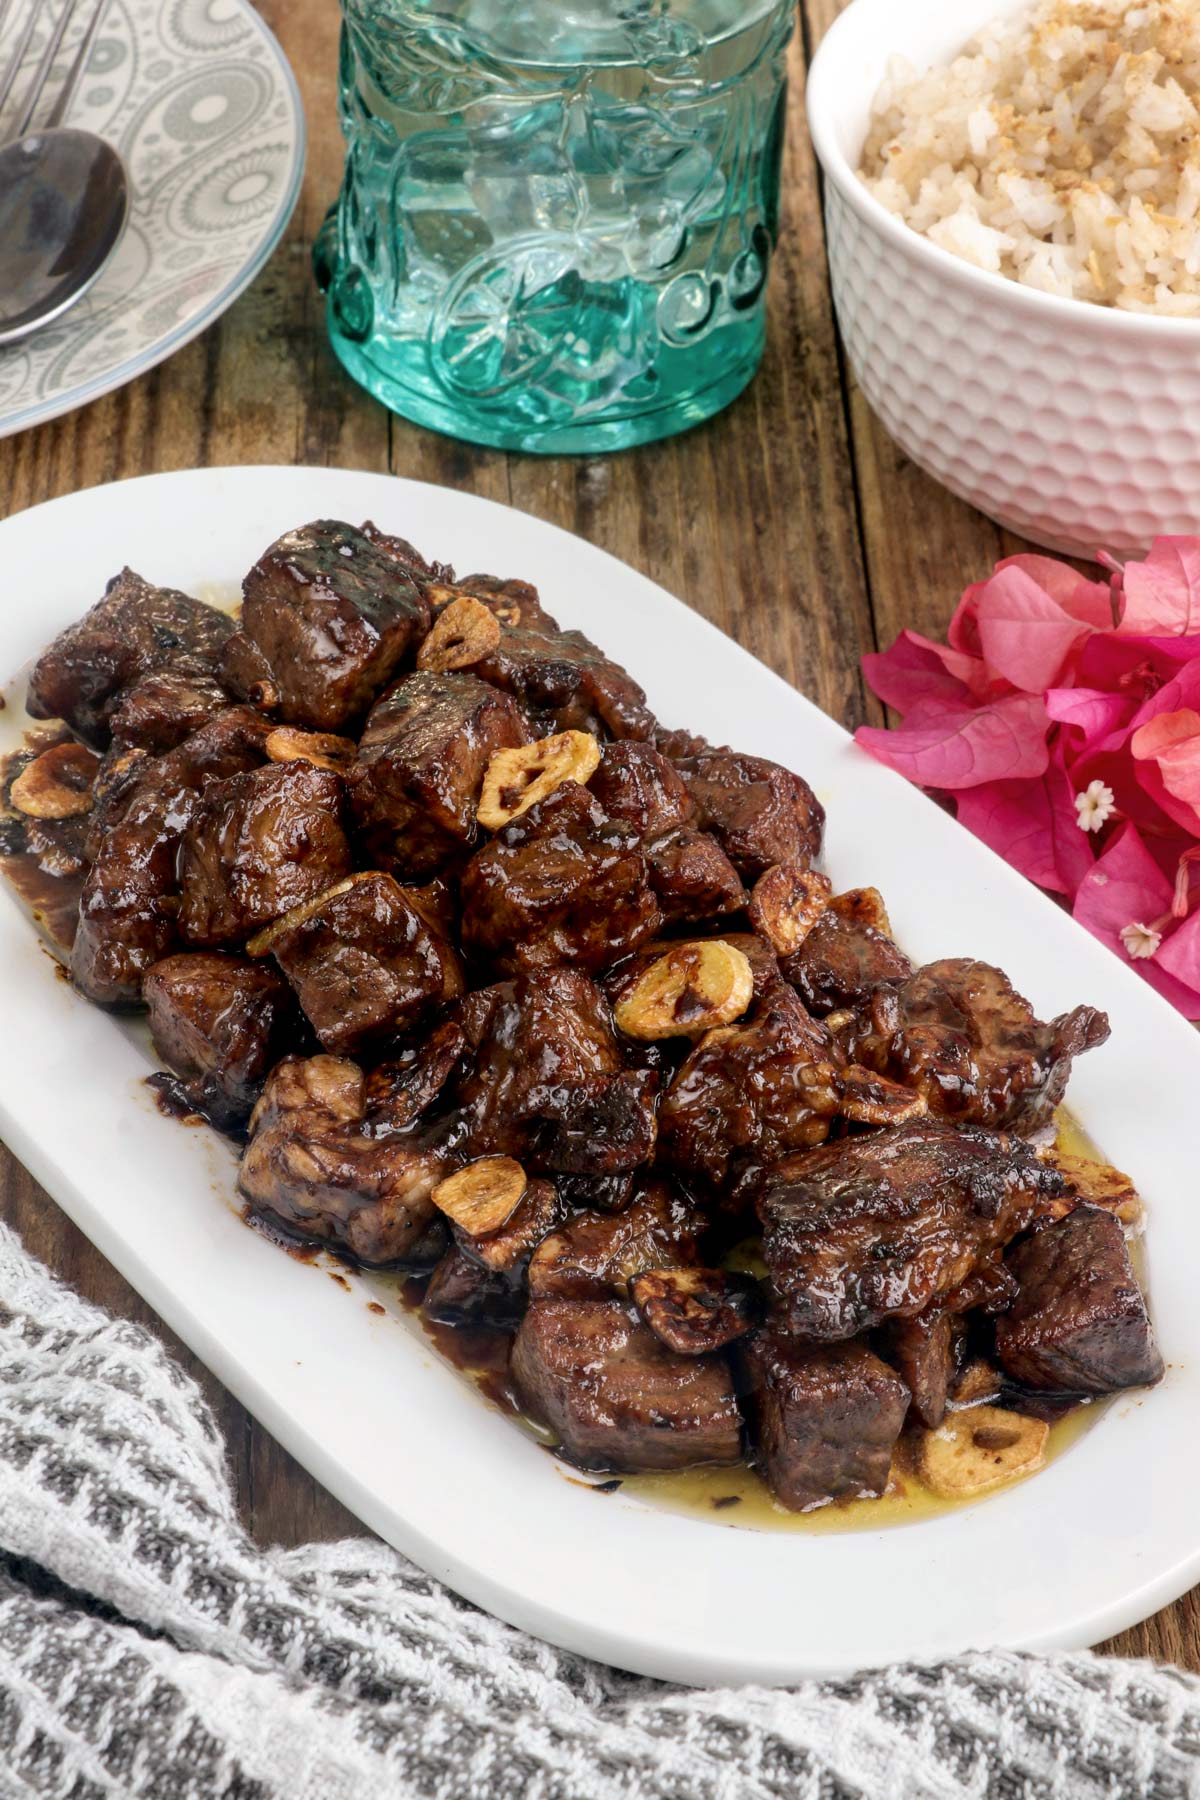 Beef Salpicao with tender beef chunks coated with a savory sauce.